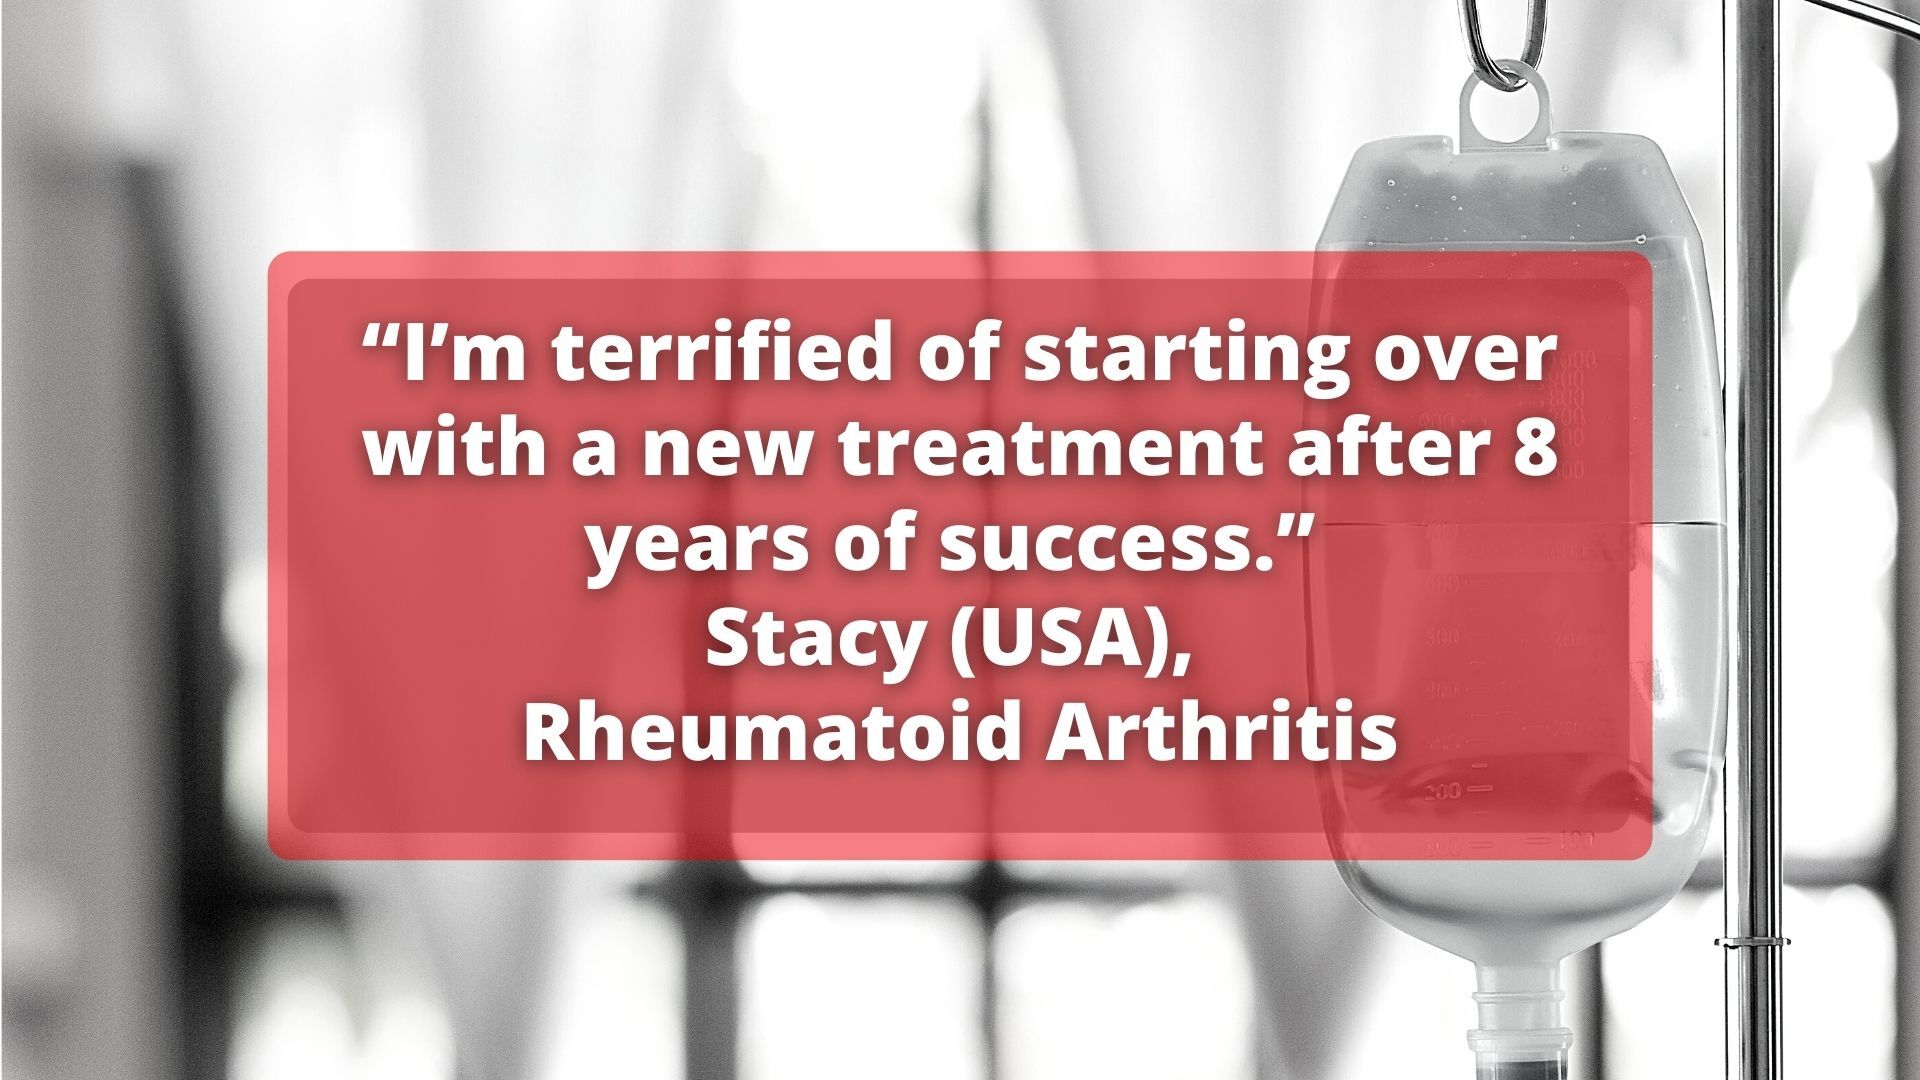 “I’m terrified of starting over with a new treatment after 8 years of success.”